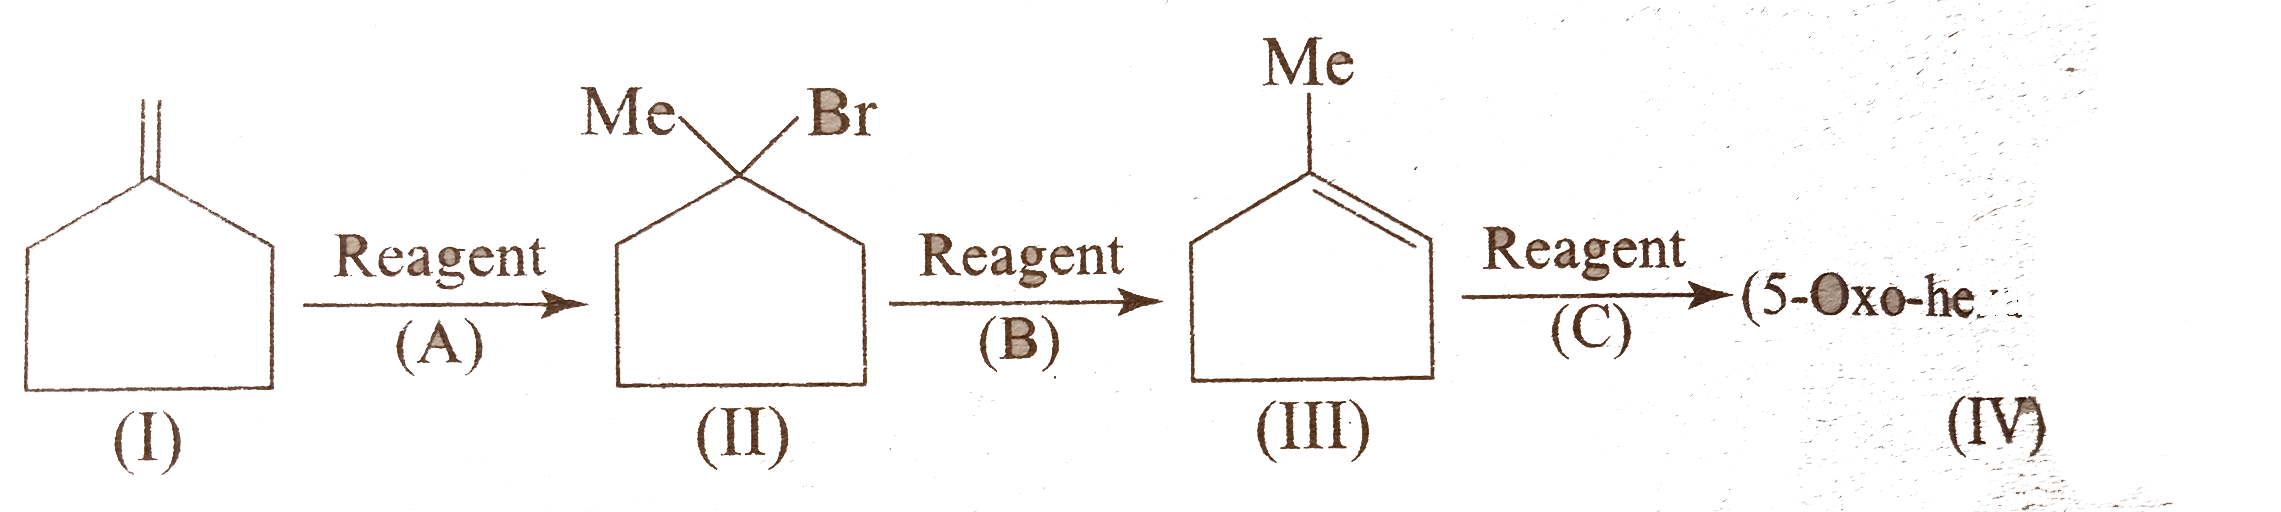 Which of the following connot be used as reagent (B) ?